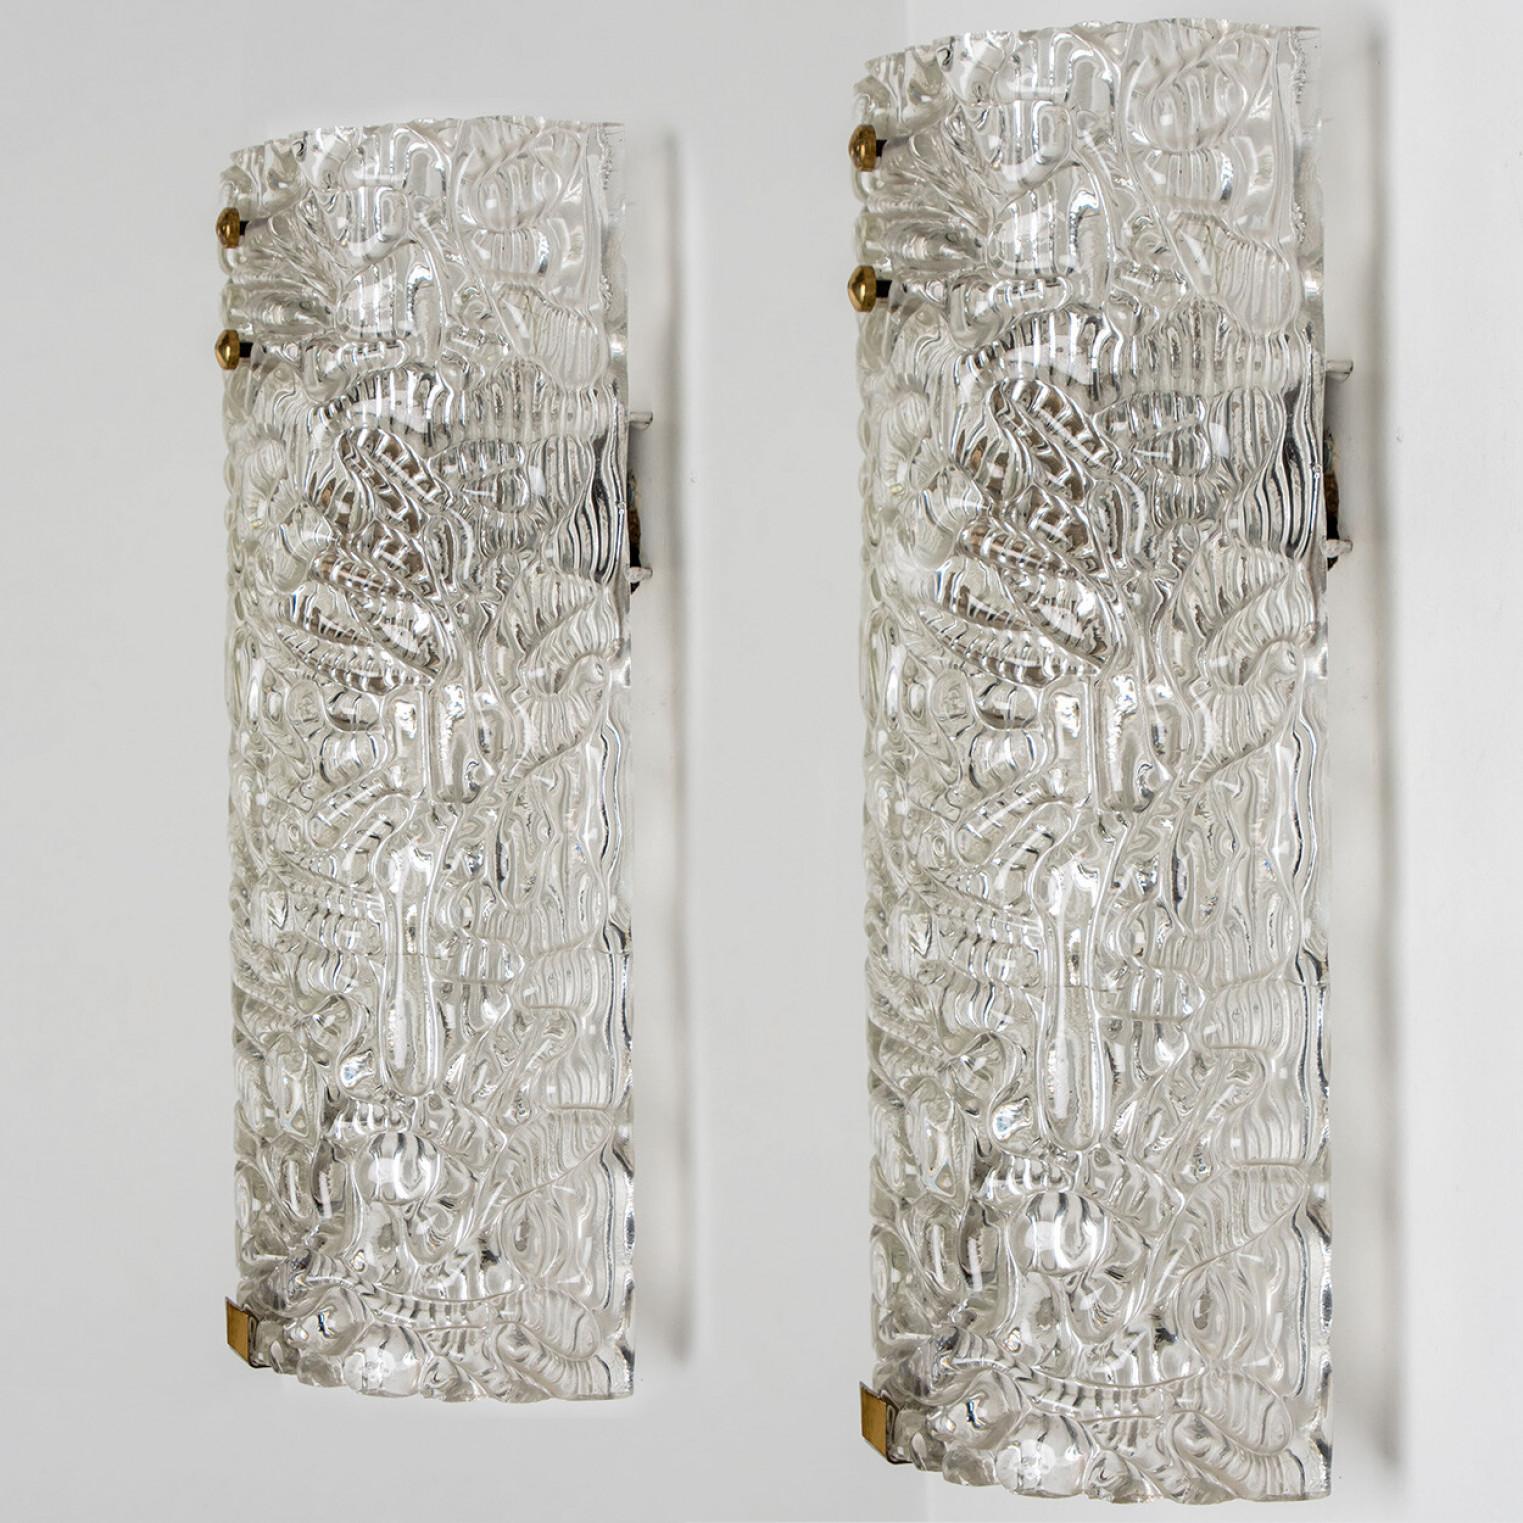 A pair of Clear Bubbled Glass Wall Light Fixtures by Hillebrand, Germany, 1960s For Sale 3